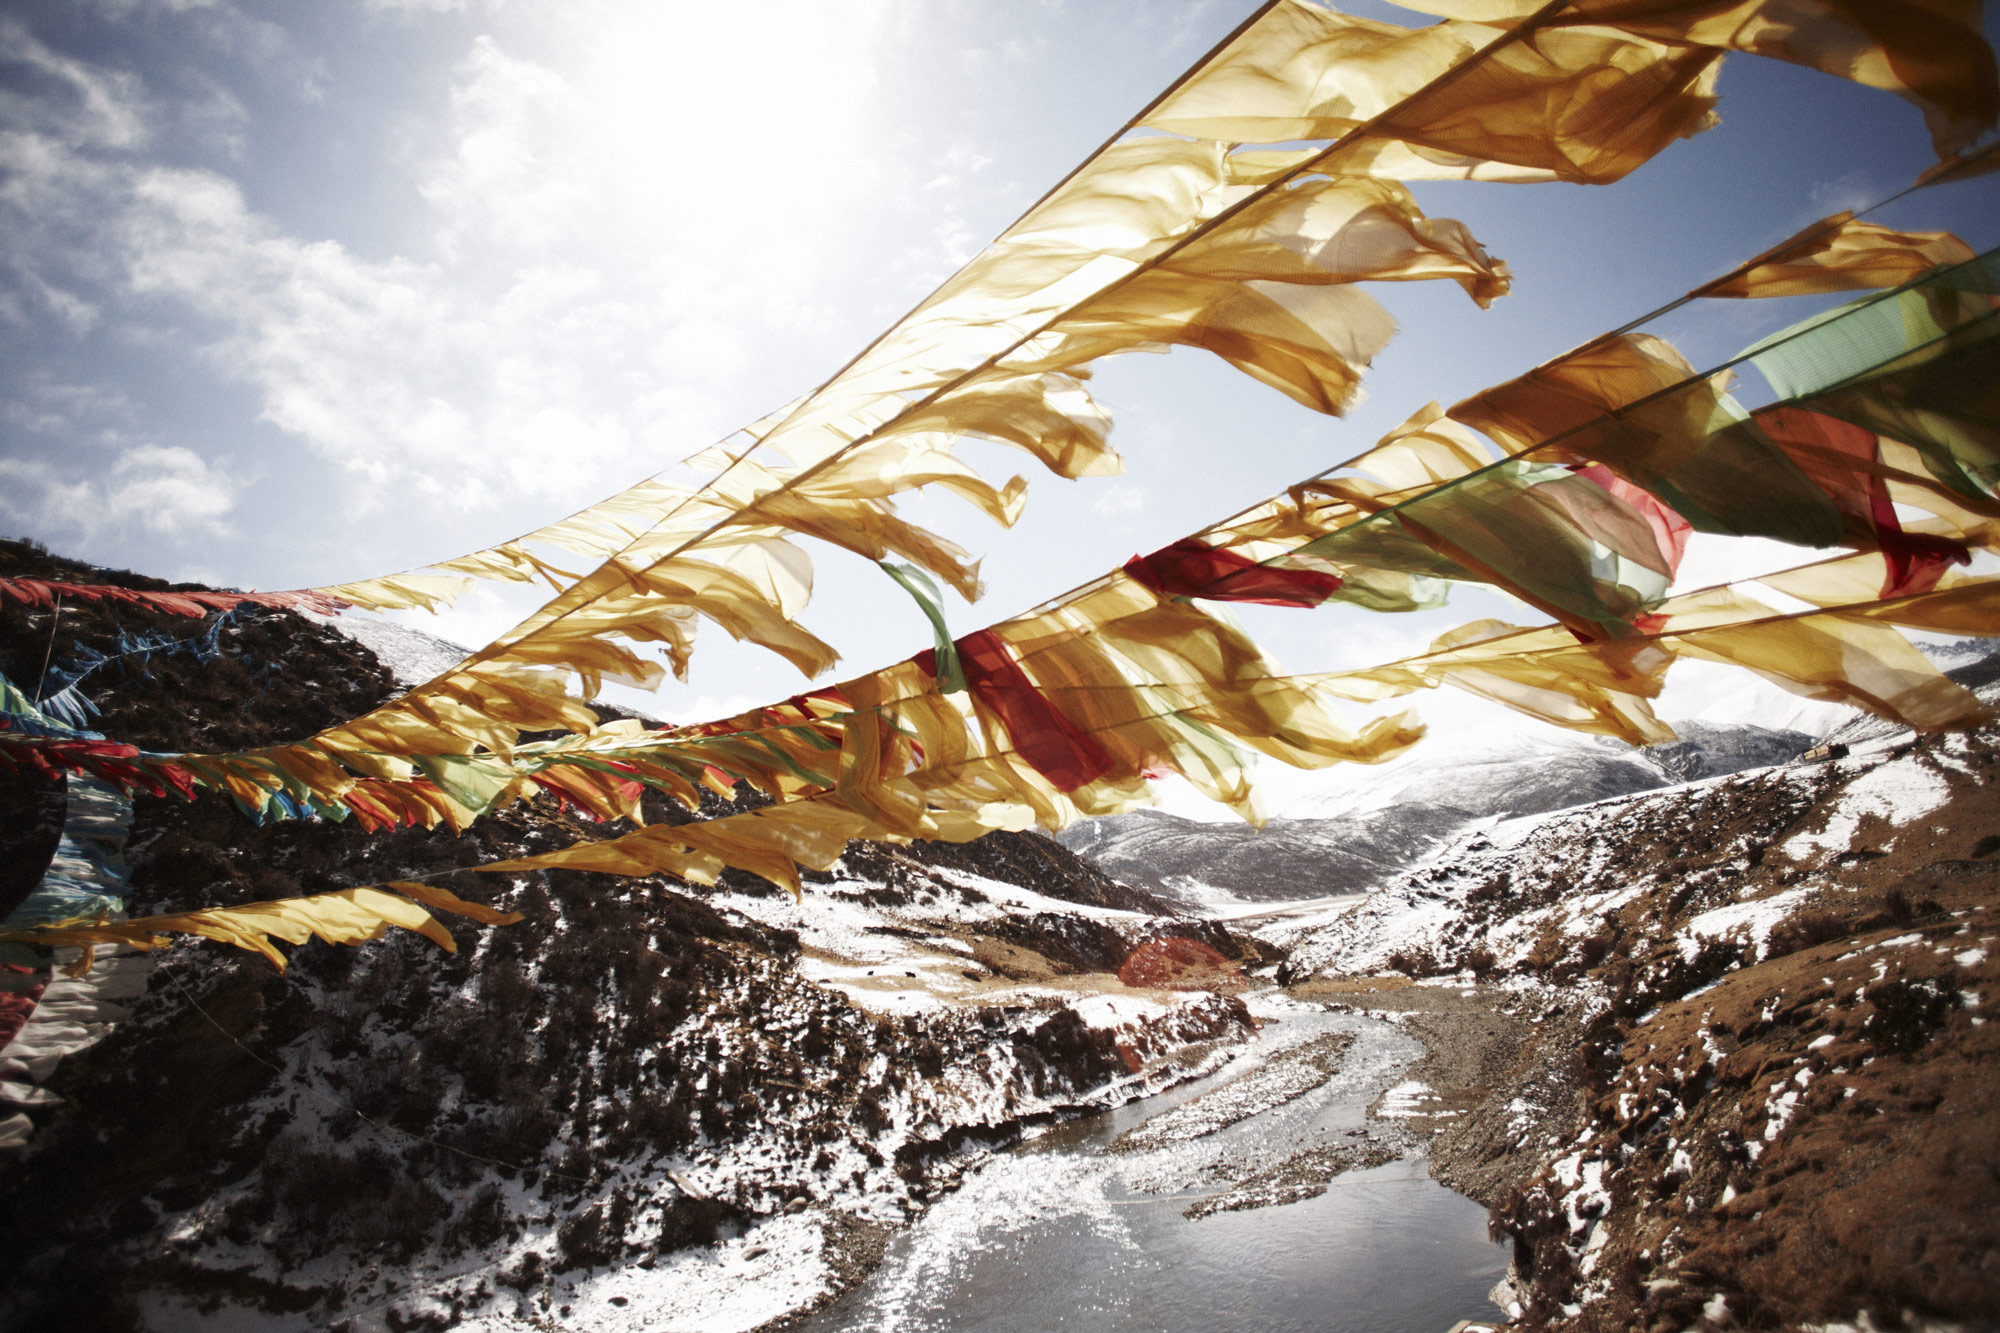 Tibet, 2011: Flags in wind with mountains in background